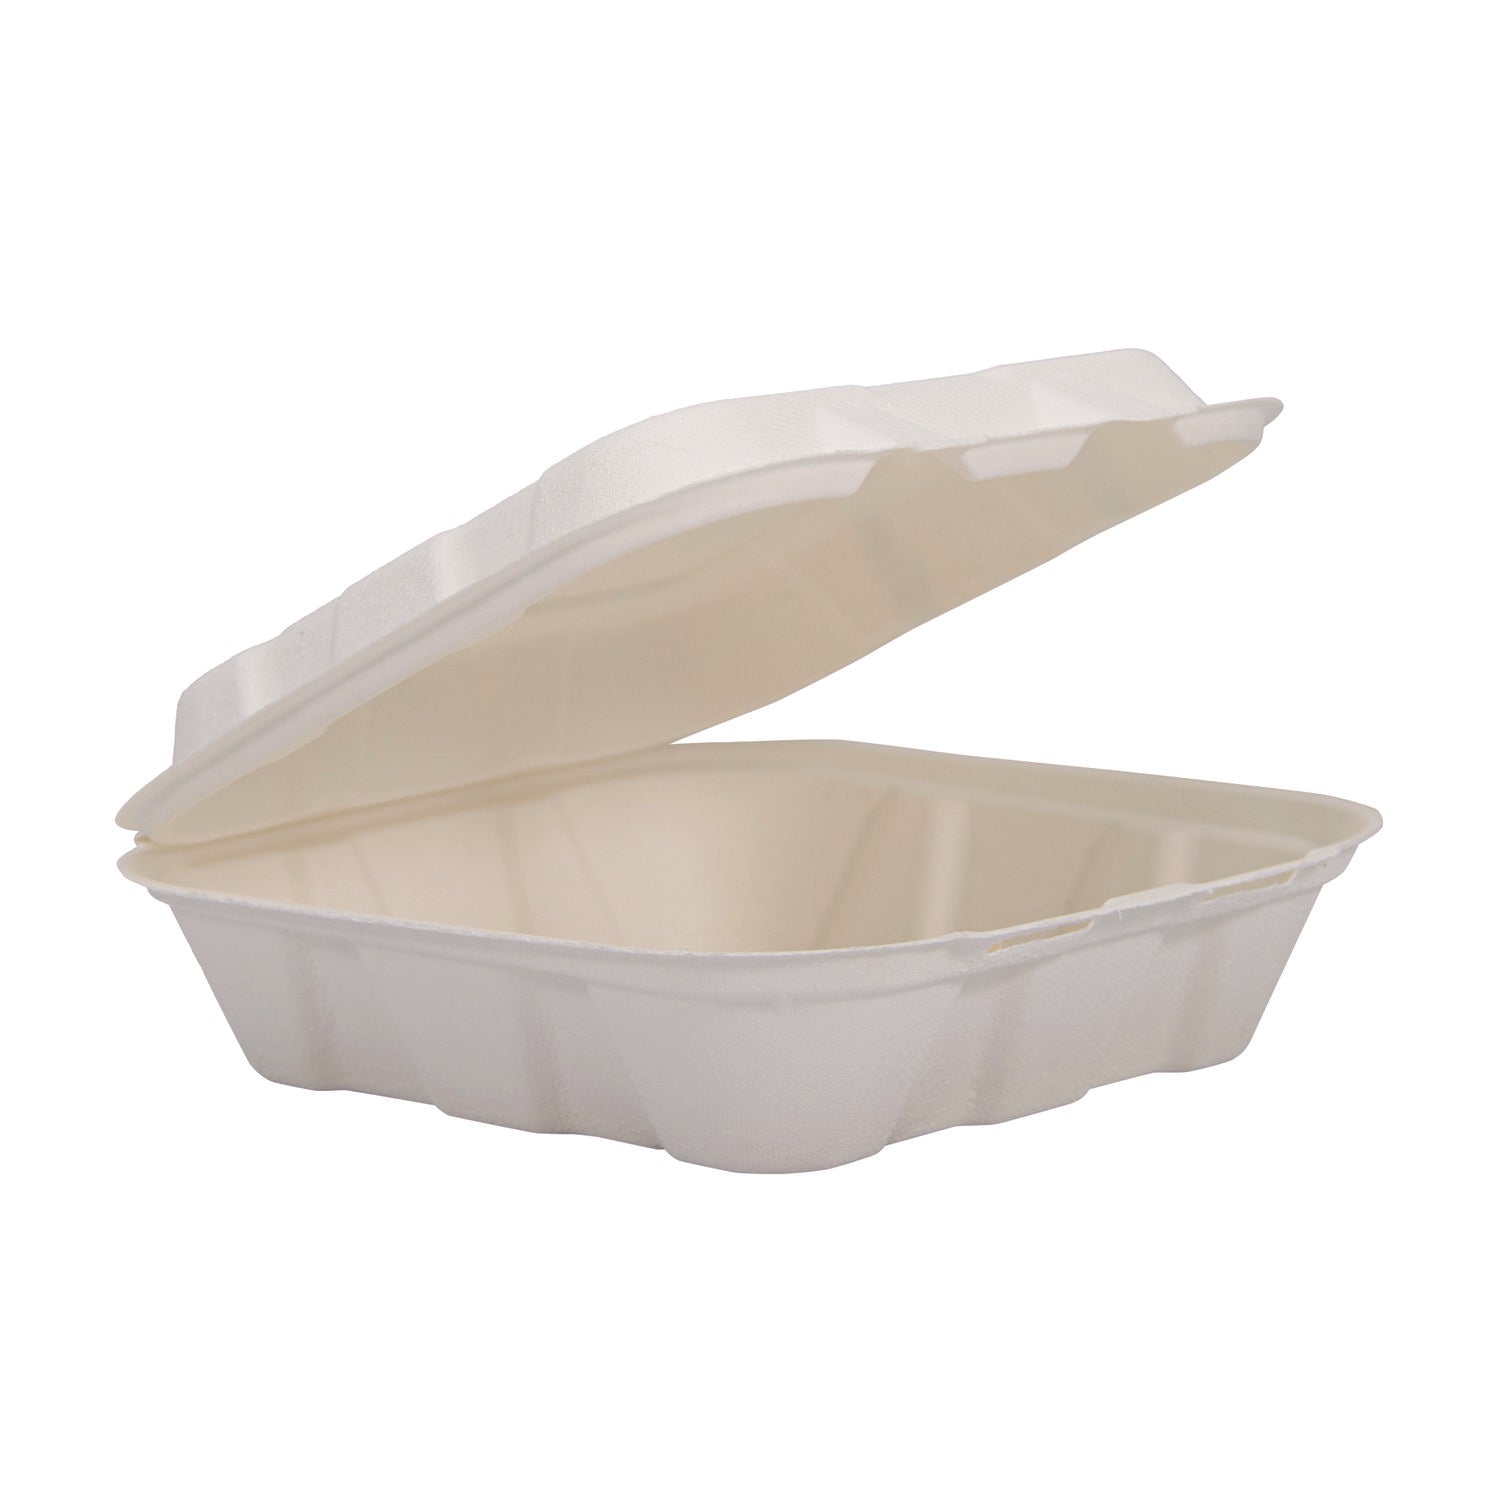 compostable-fiber-hinged-trays-proplanet-seal-803-x-838-x-193-ivory-molded-fiber-200-carton_dcchc8fbr1 - 1